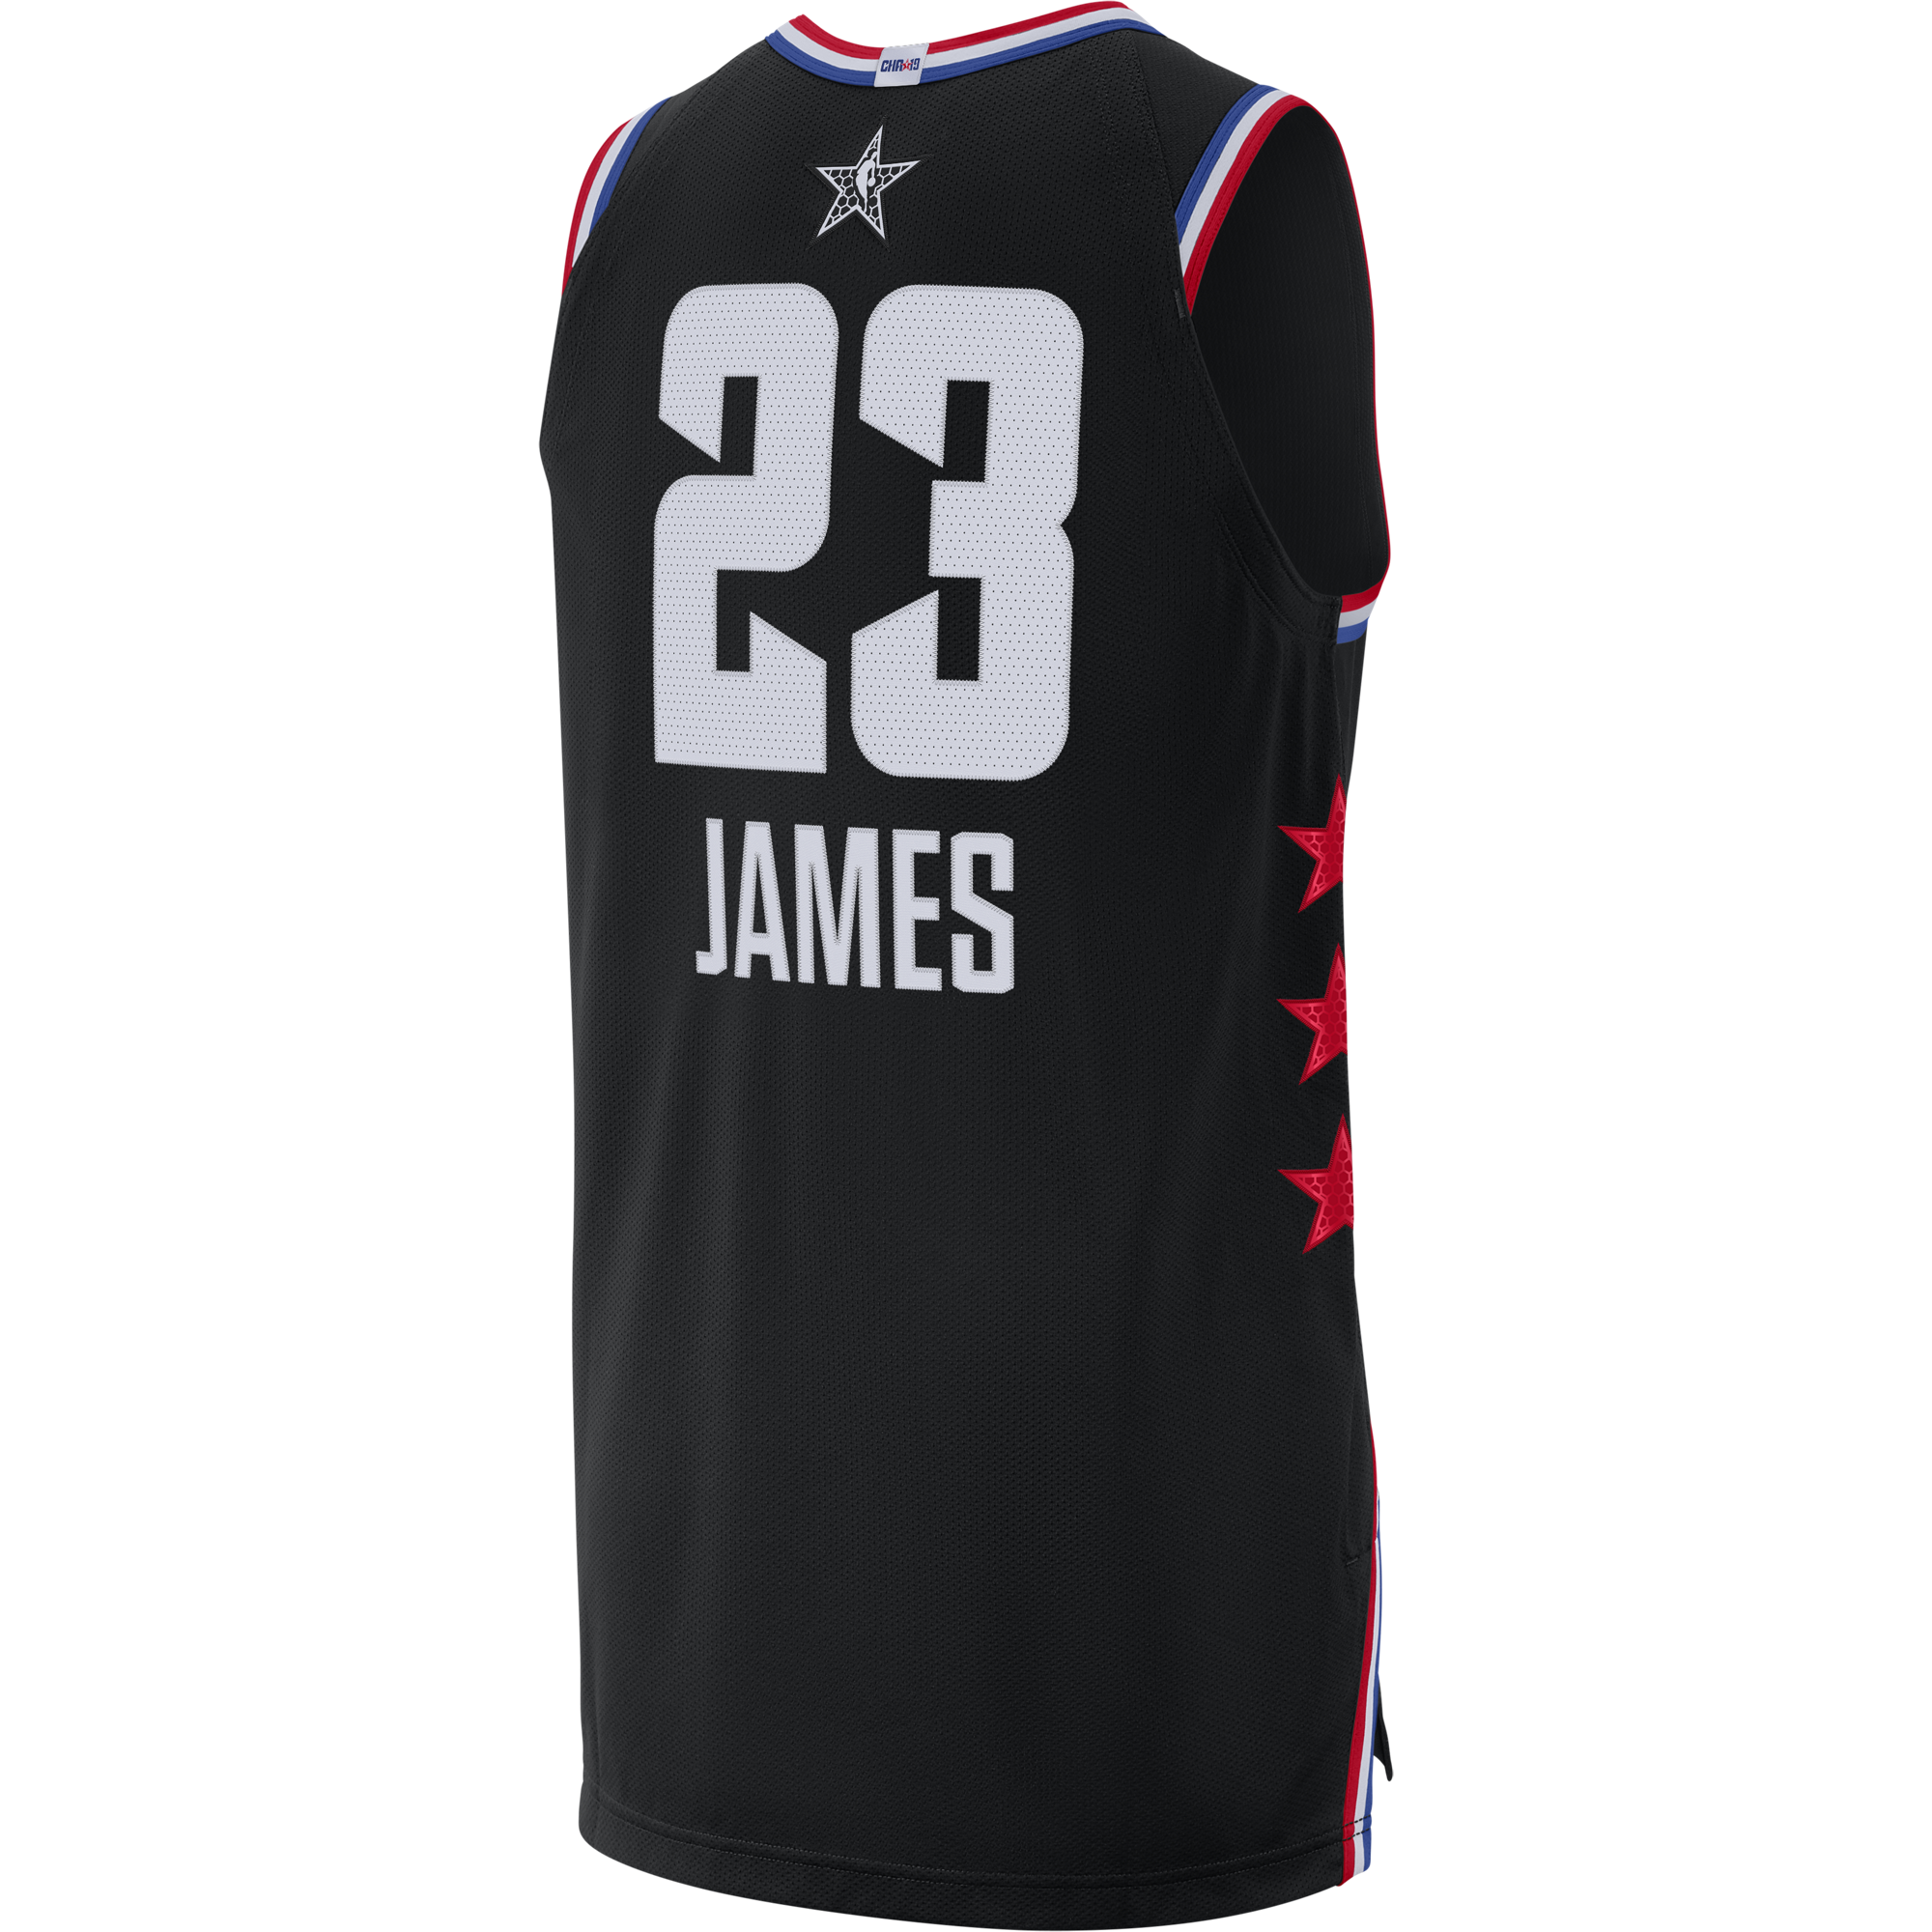 NIKE AIR JORDAN NBA ALL STAR WEEKEND 2019 LEBRON JAMES AUTHENTIC JERSEY  WHITE for £155.00